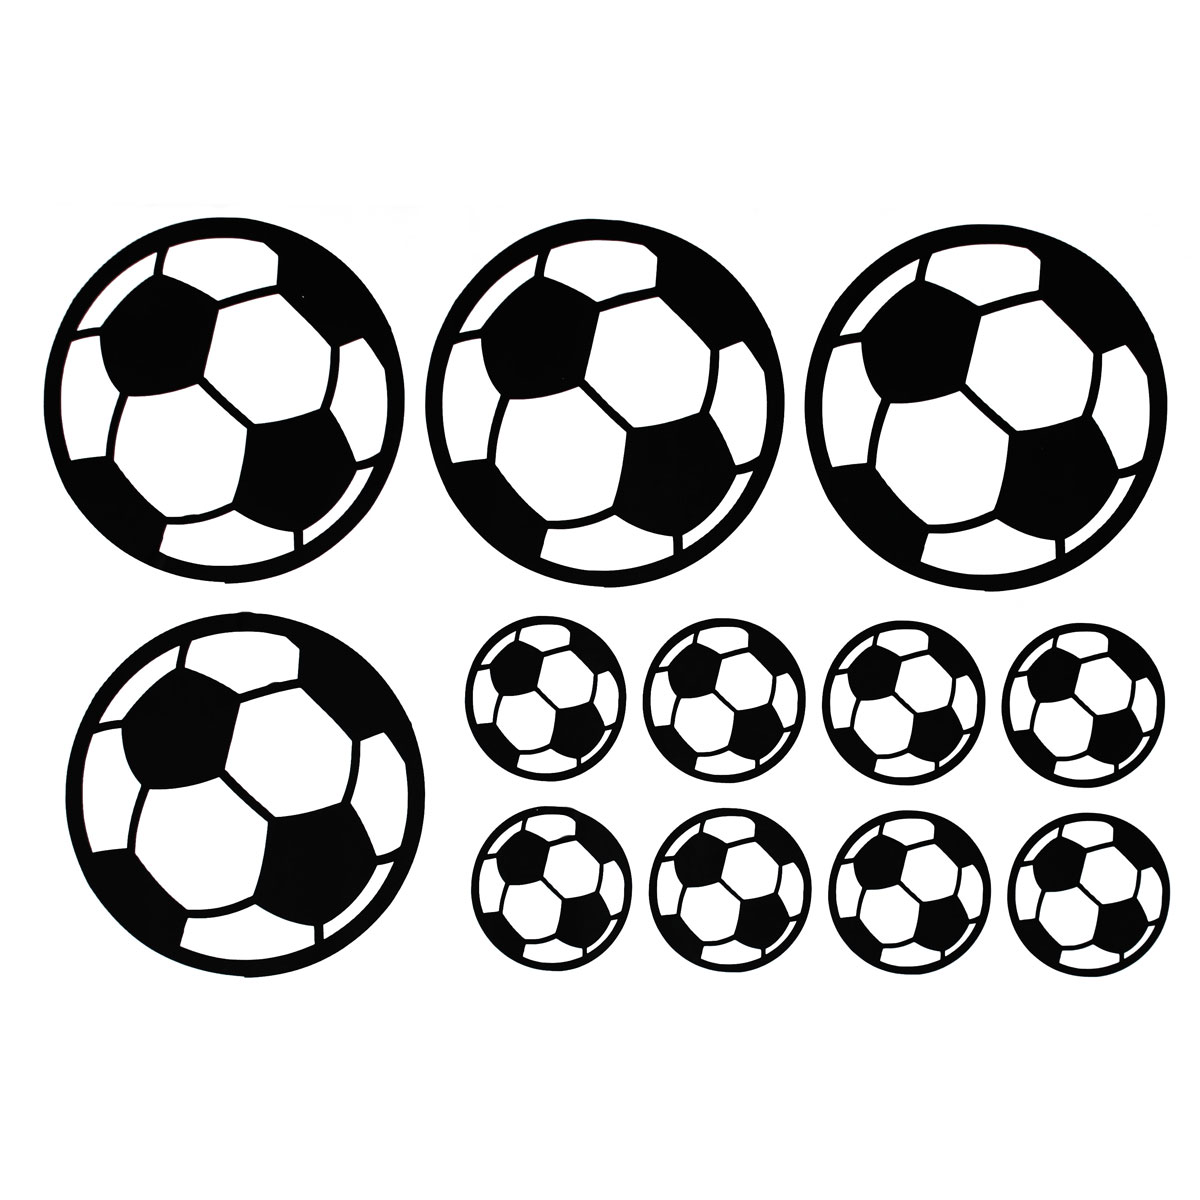 12PcsSet-Football-Soccer-Wall-Stickers-Children-Nursery-Kids-Room-Decals-Gift-Home-Decorations-1470248-2